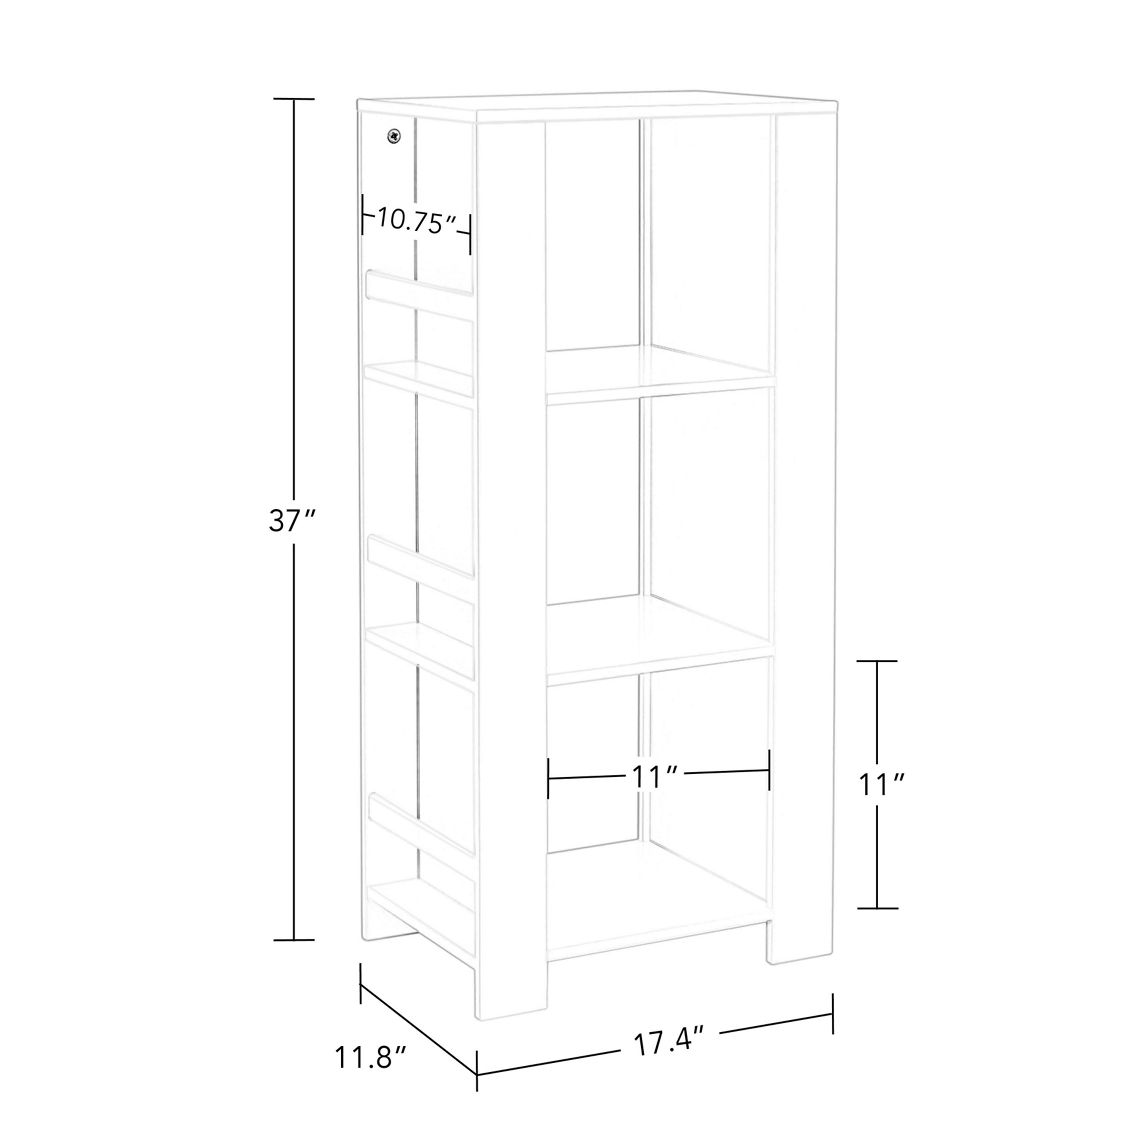 RiverRidge Kids Book Nook Cubby Storage Tower with 2 10'' Wall Bookshelves - Image 3 of 5